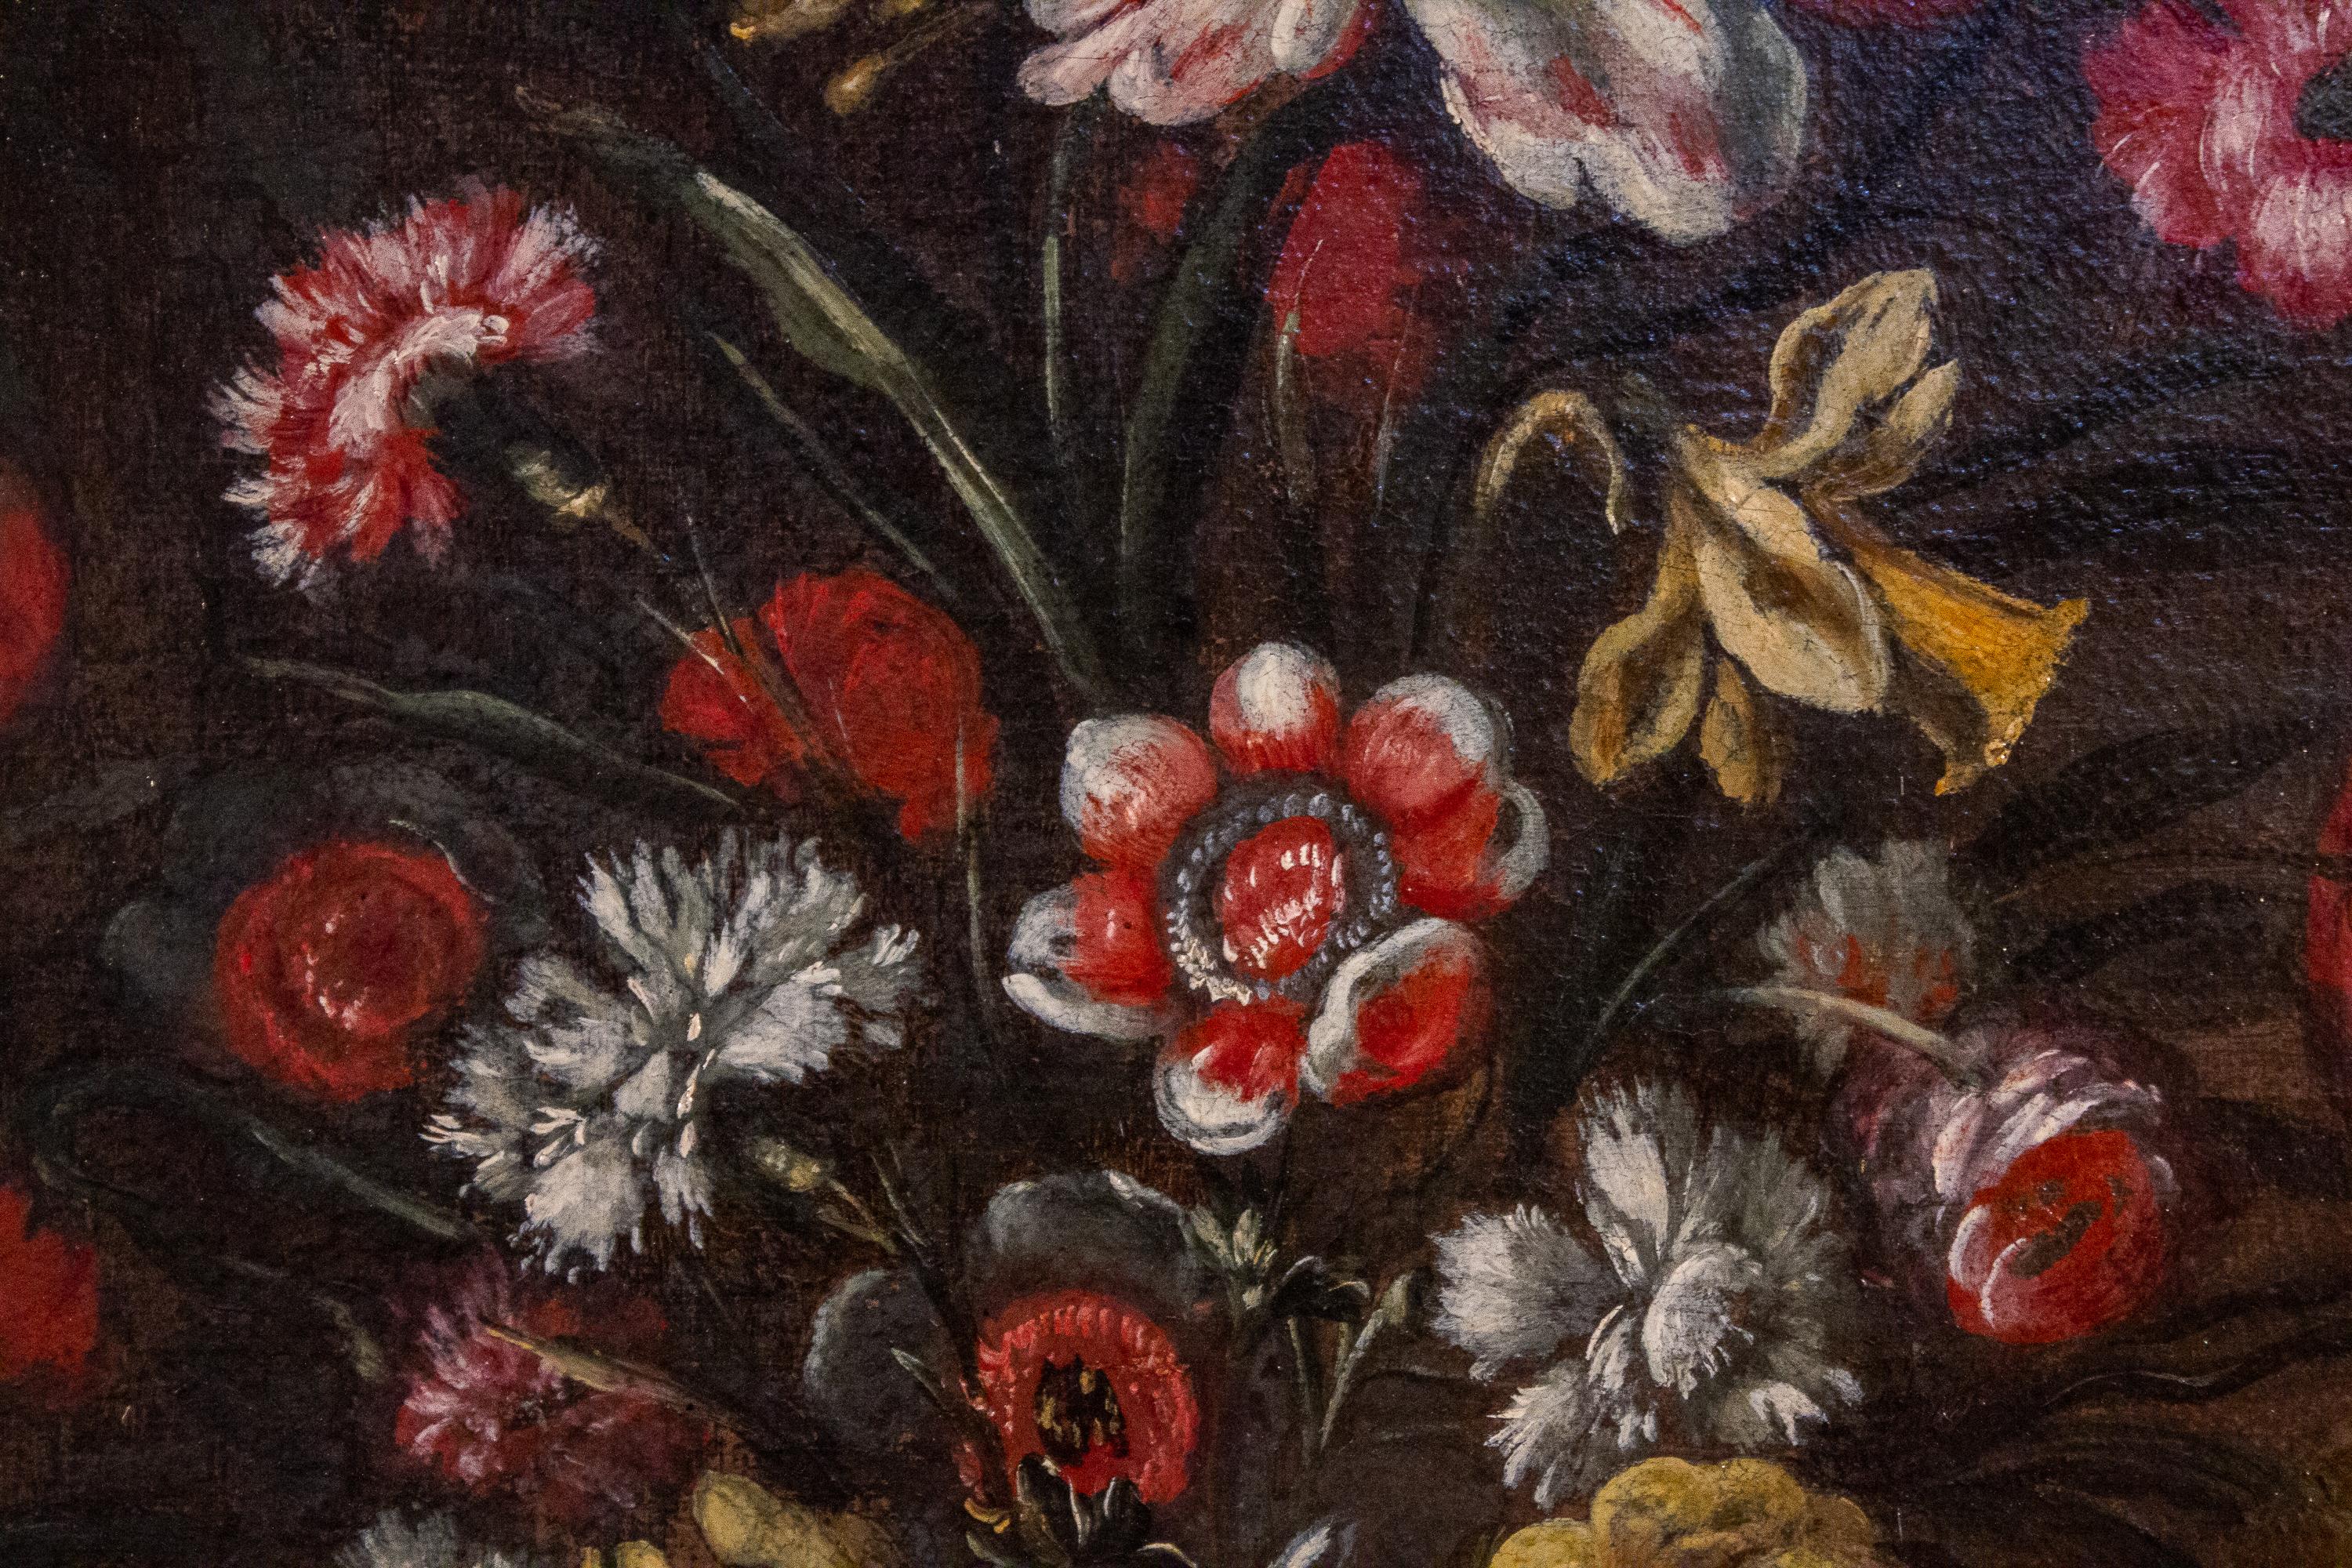 Pair of 18th century Italian Still Life Paintings of Flowers   For Sale 7